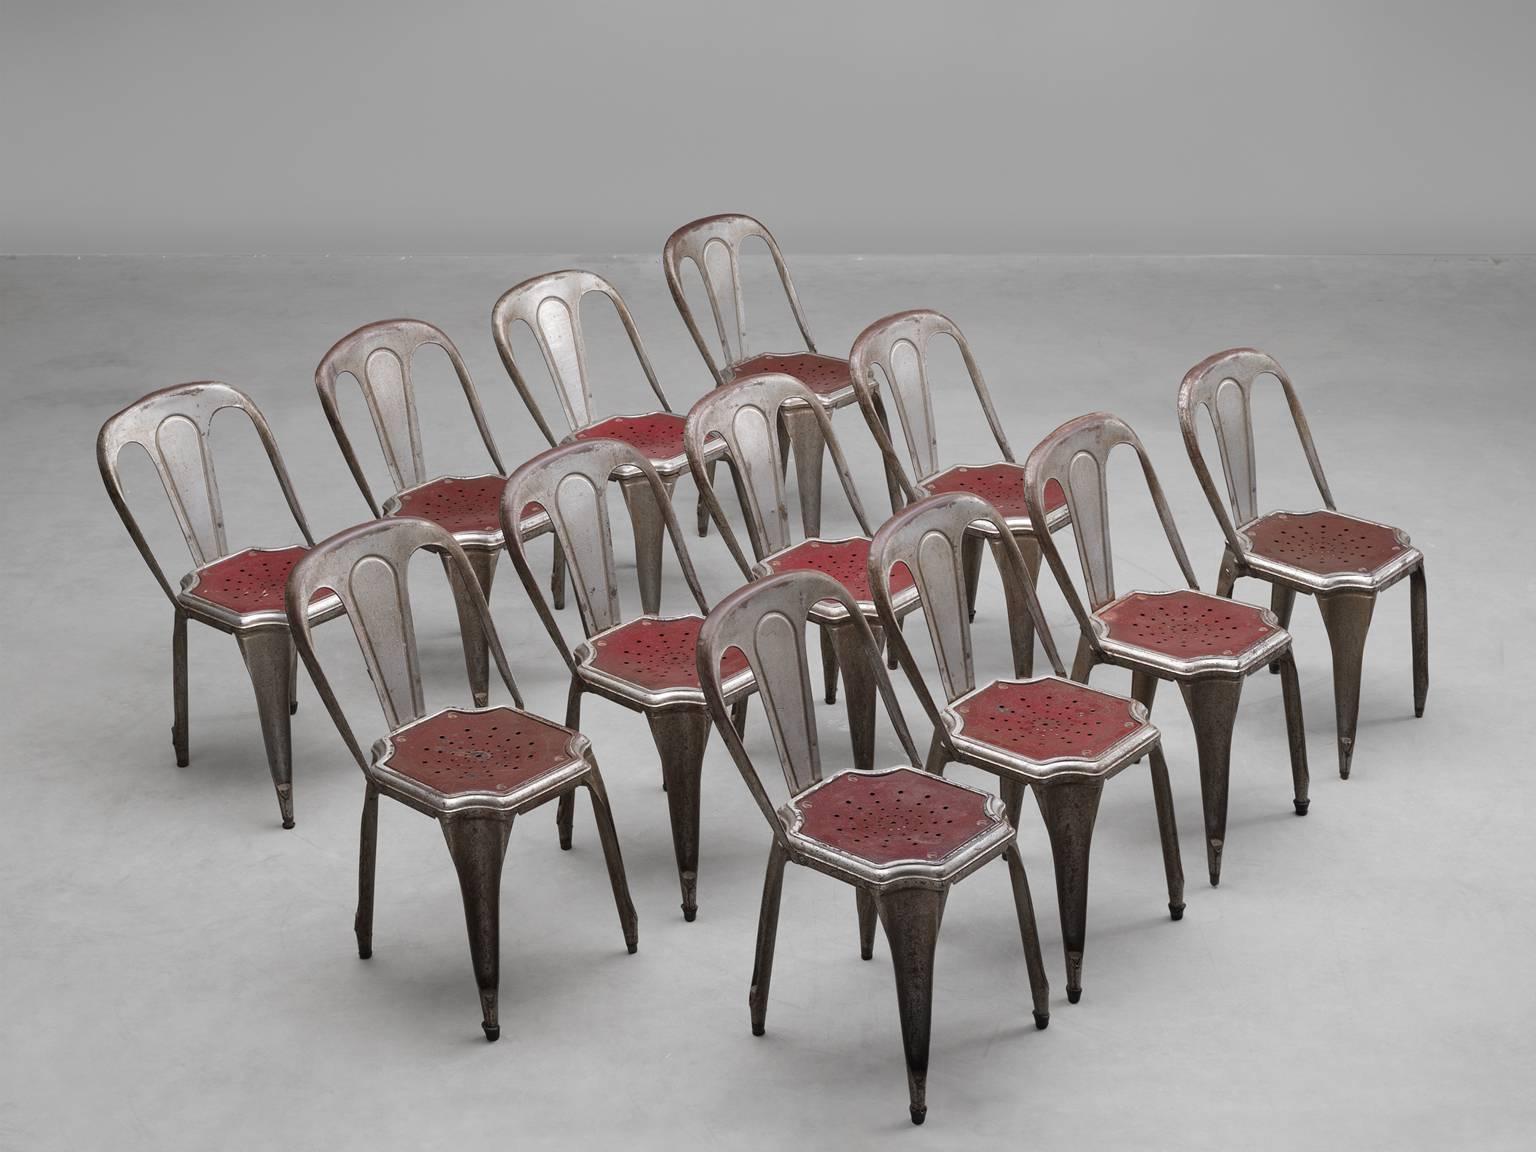 Large set of stackable chairs by Fibrocit Bruxelles, Belgium 1950s.

This typical metal chair has a playful design. The open character of the construction gives it a light appearance, and the nice patina gives it a lot of expression. 

More